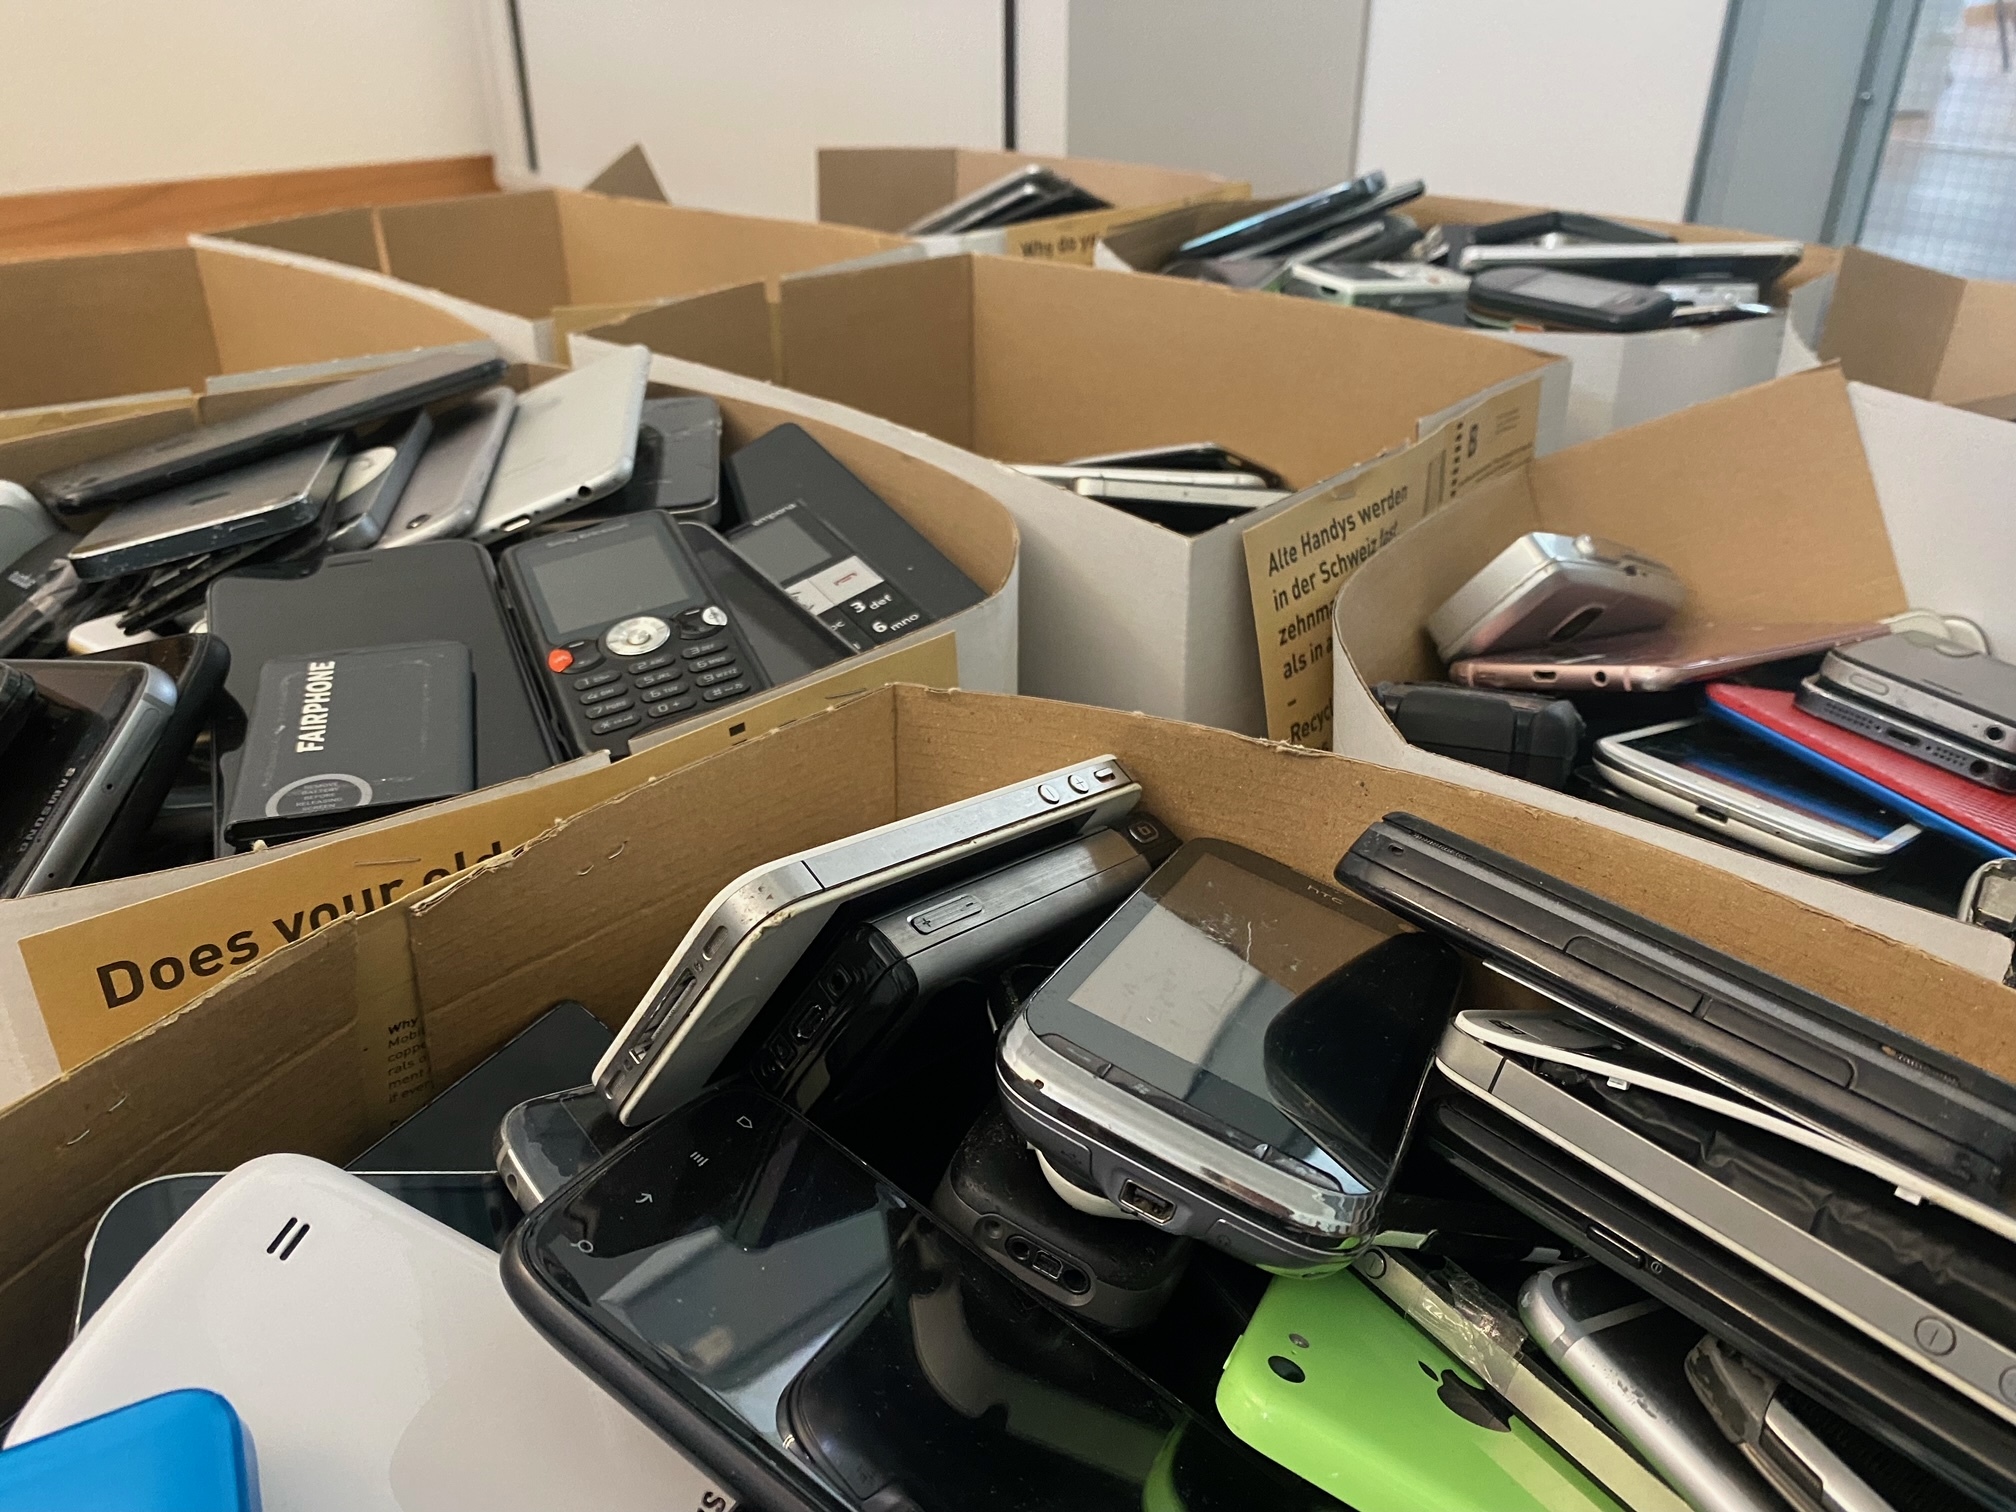 Several boxes full of old smartphones.